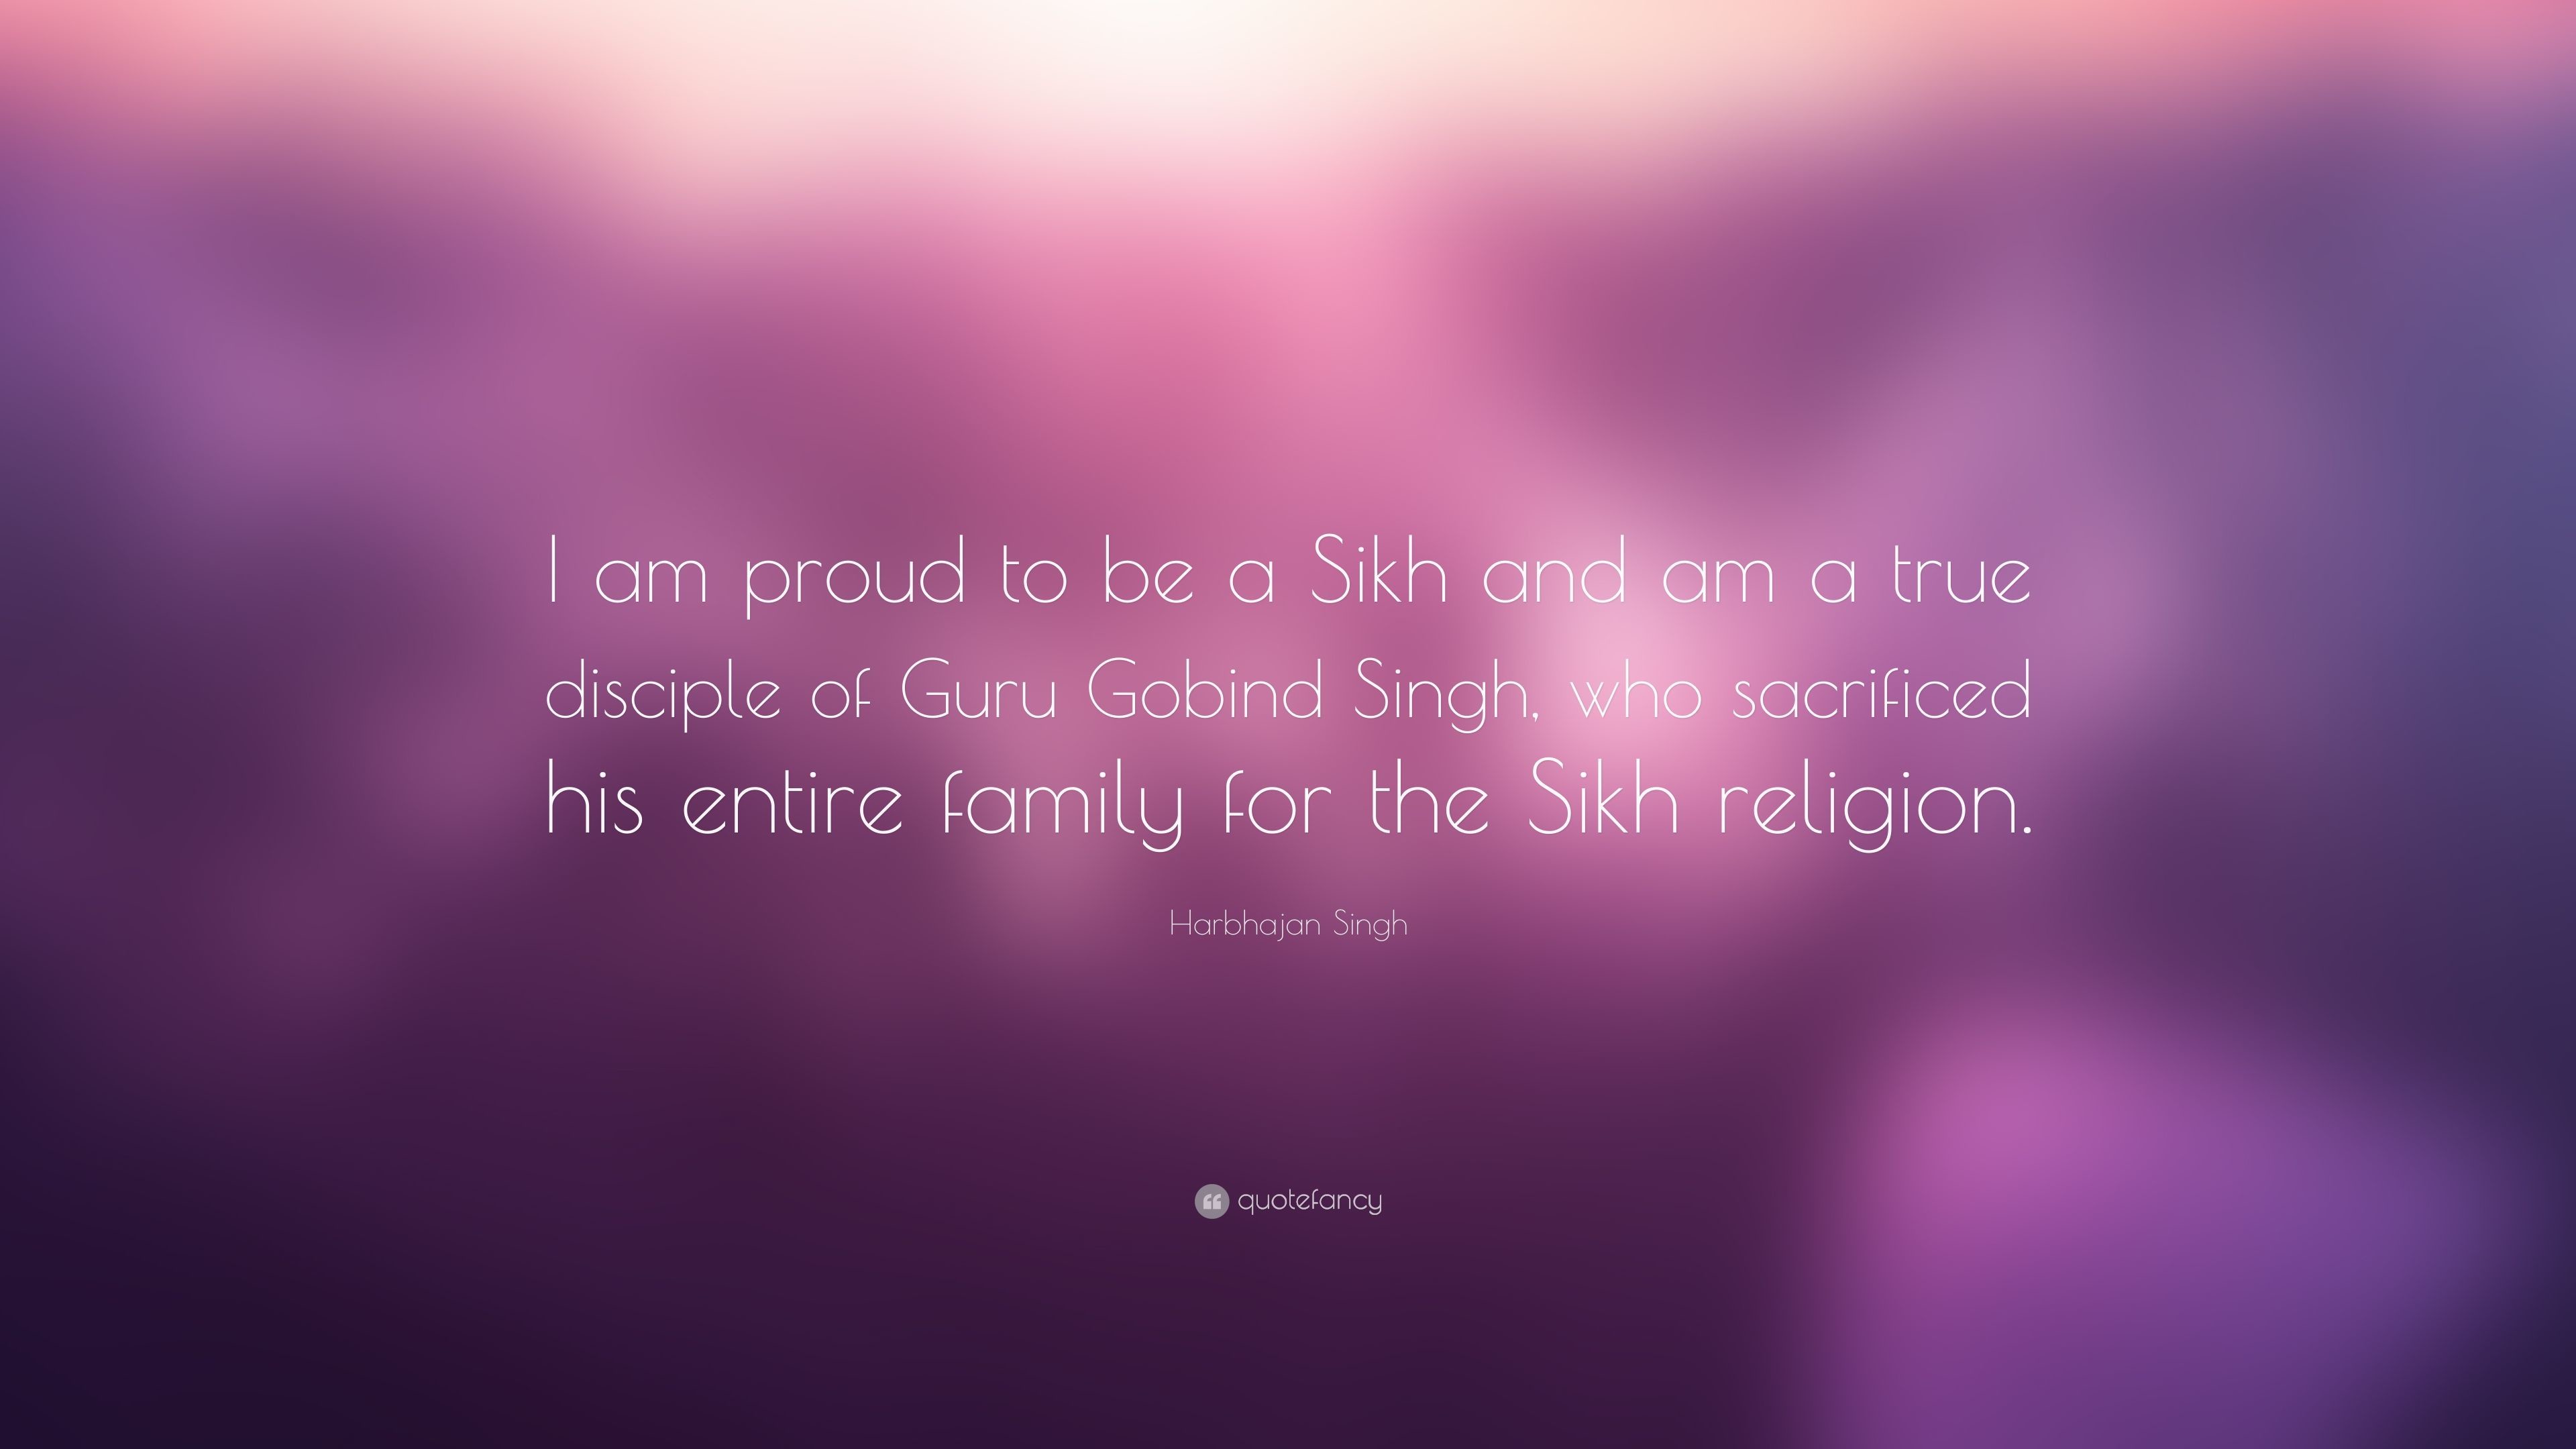 3840x2160 Harbhajan Singh Quote: “I am proud to be a Sikh and am a true